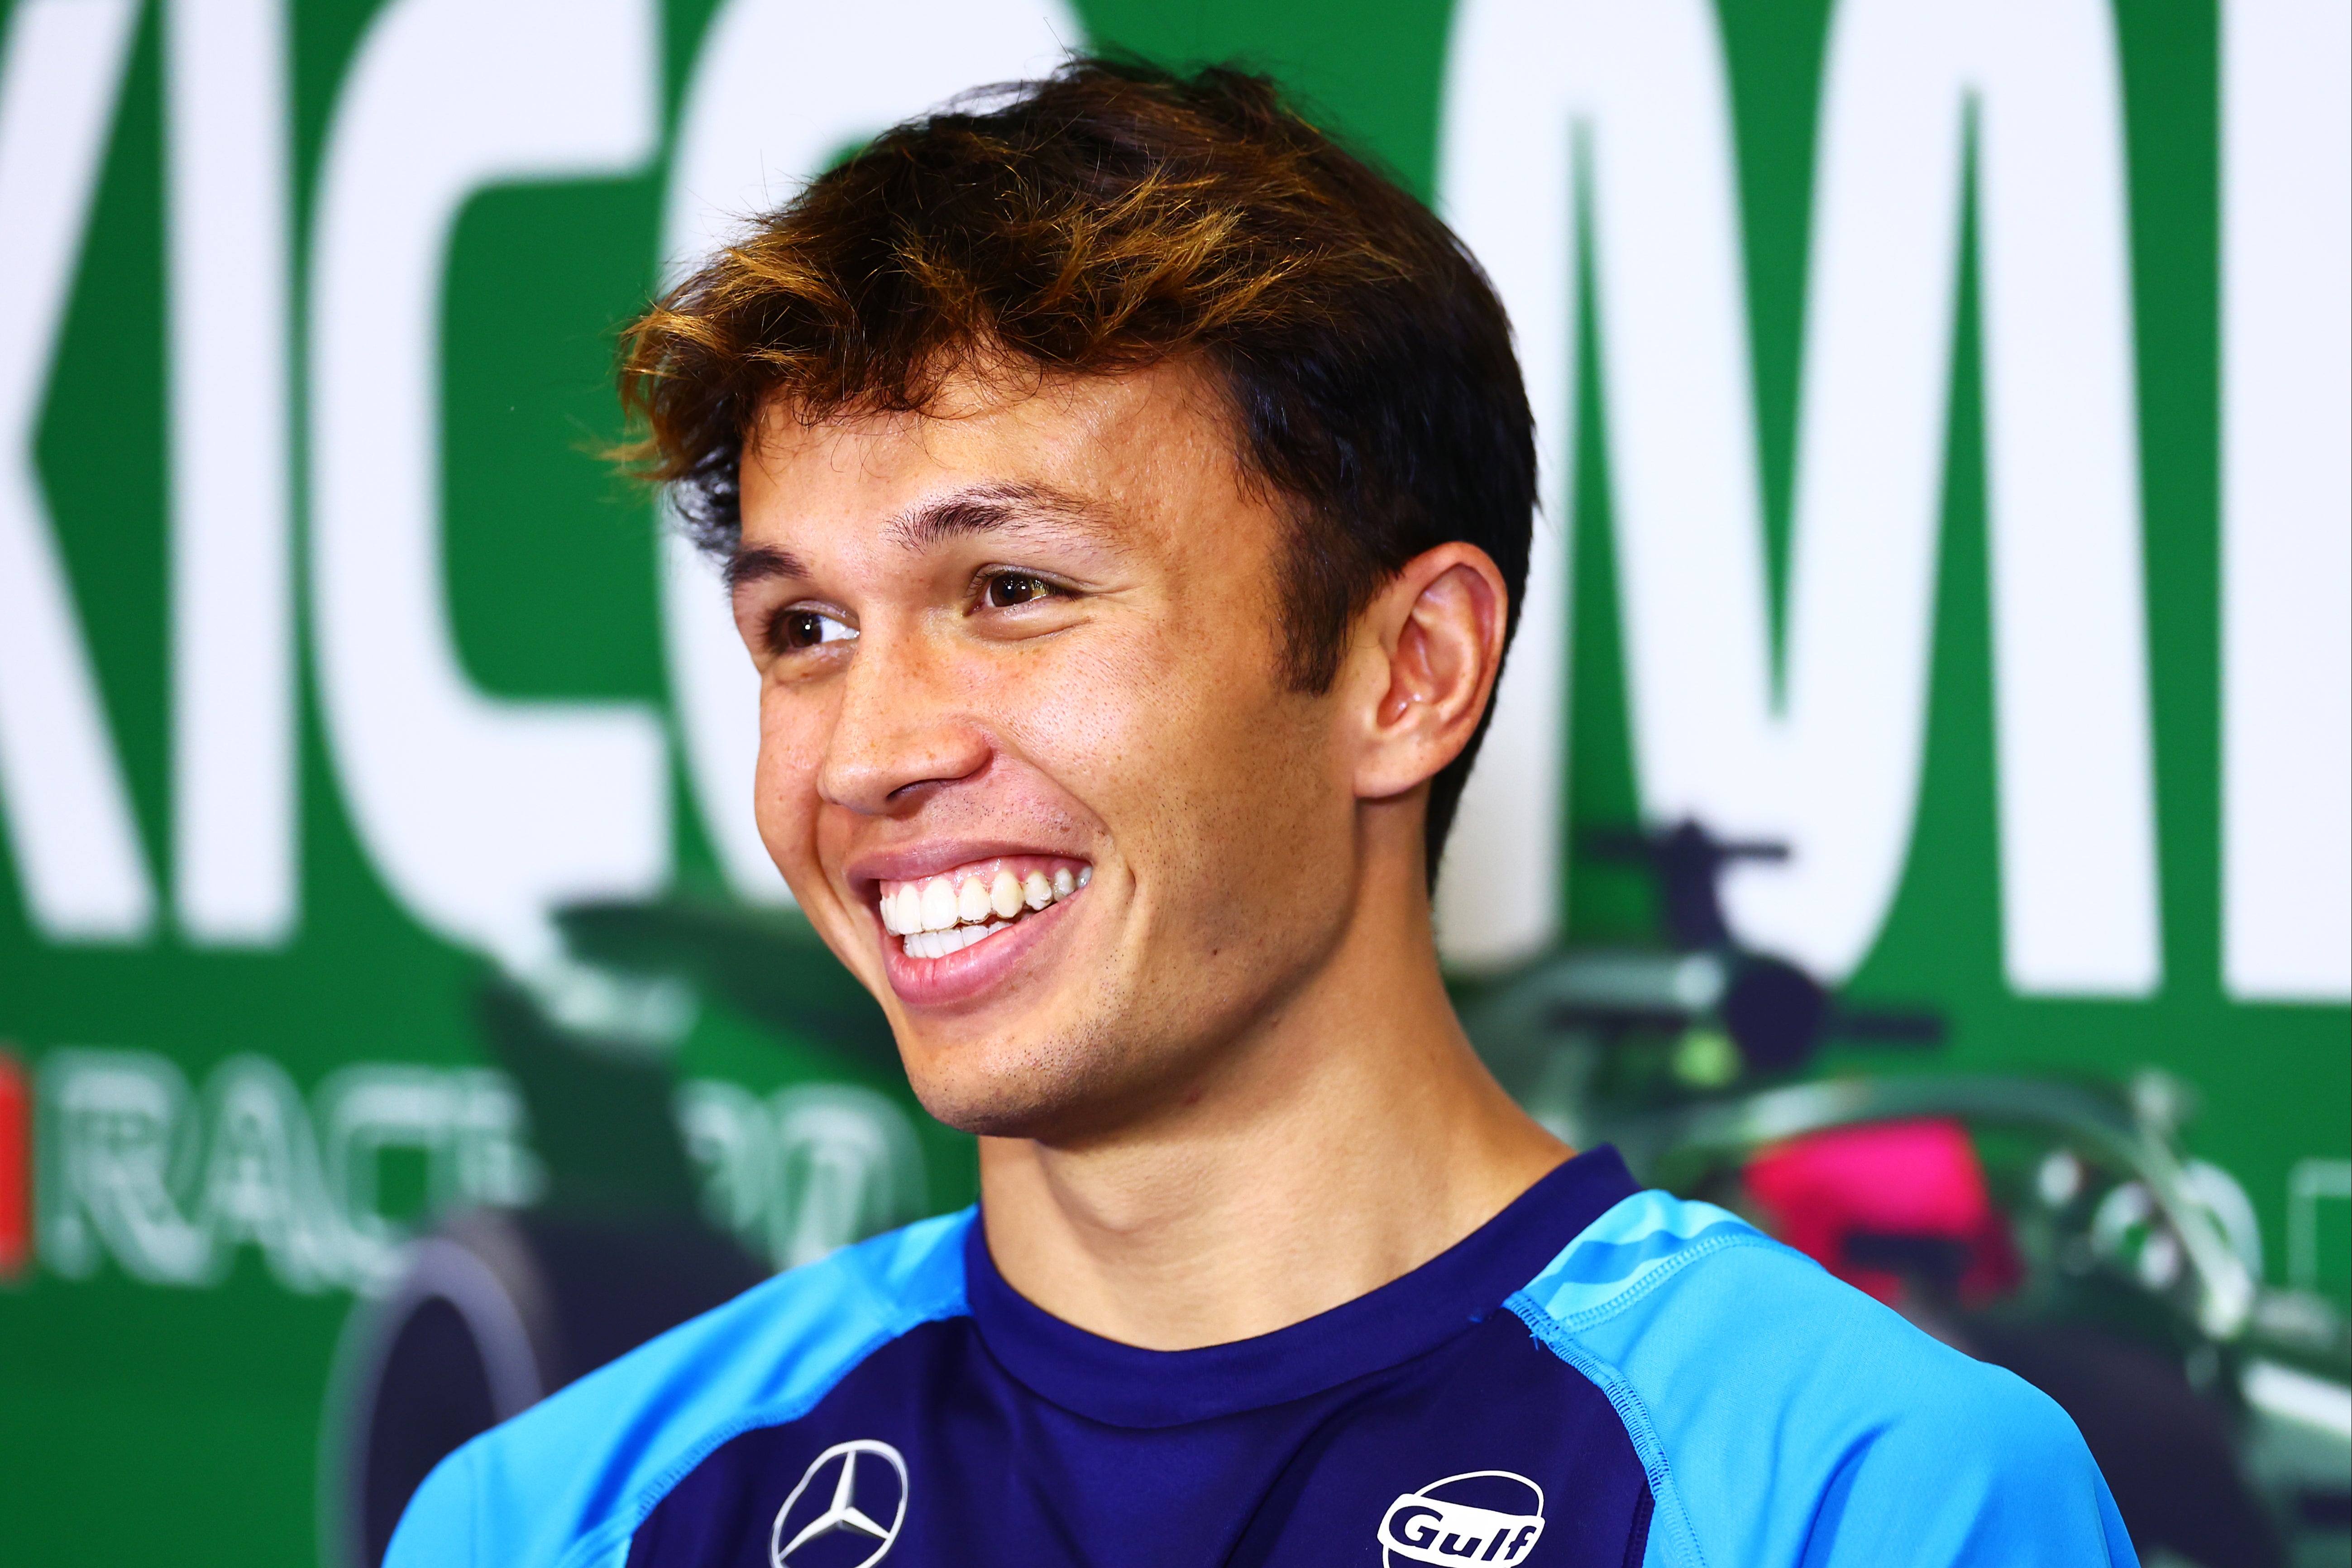 Alex Albon has signed a multi-year contract extension